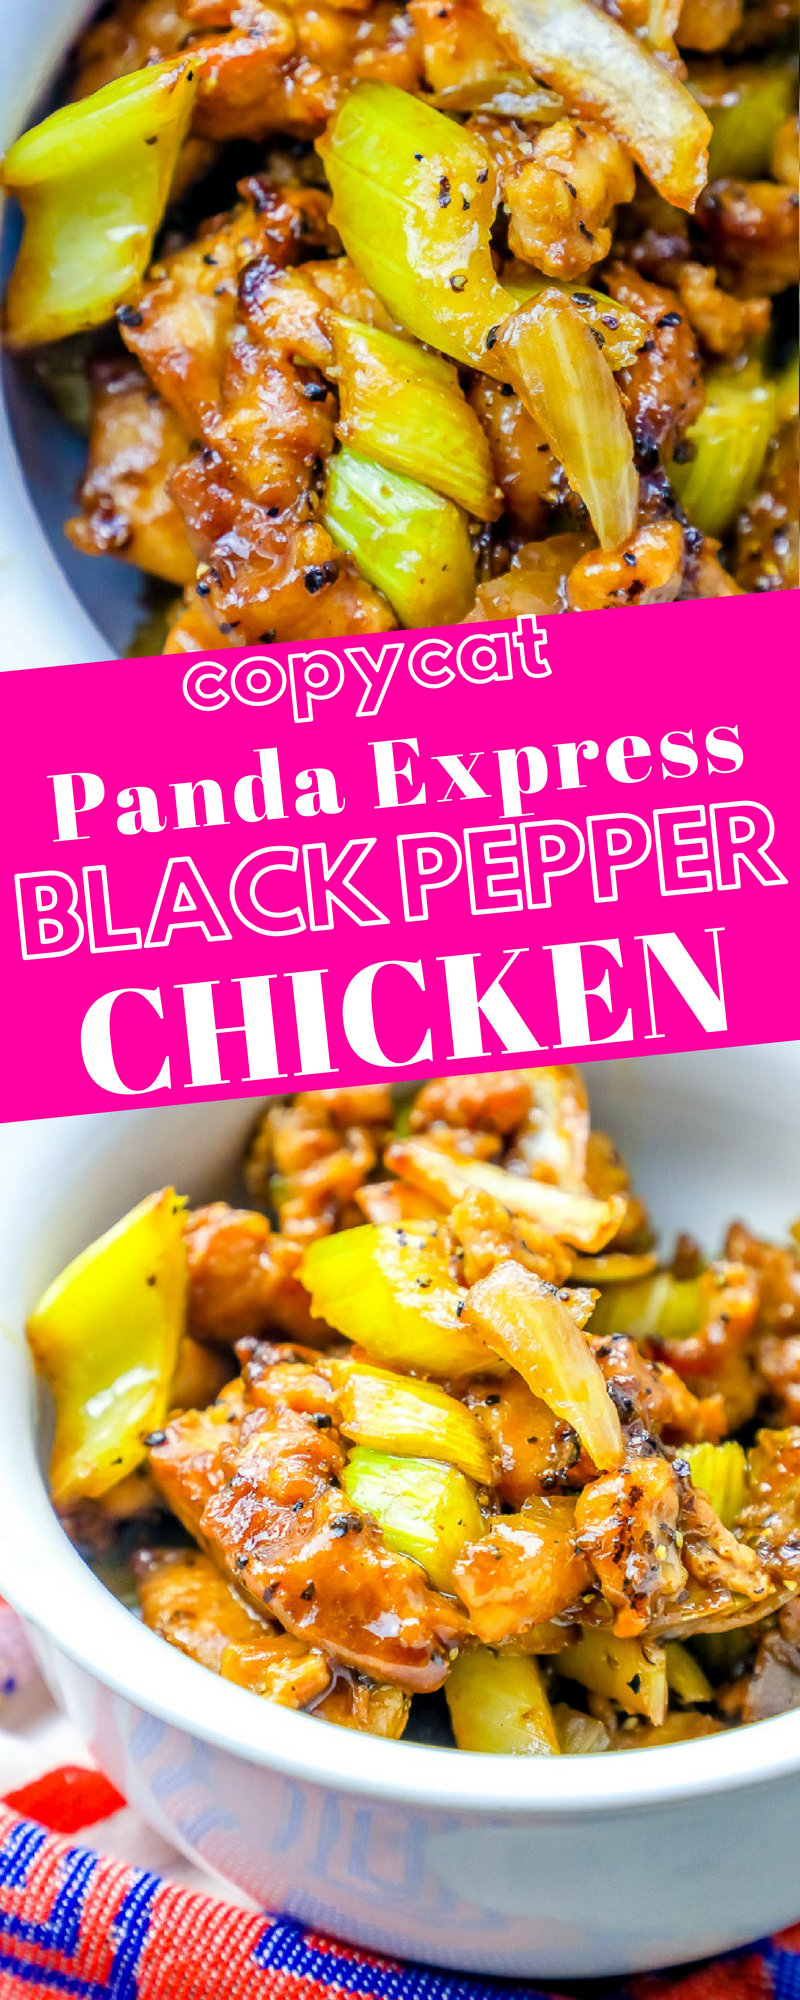 Easy Recipe: Tasty Black Pepper Chicken Recipe Chinese - The Healthy